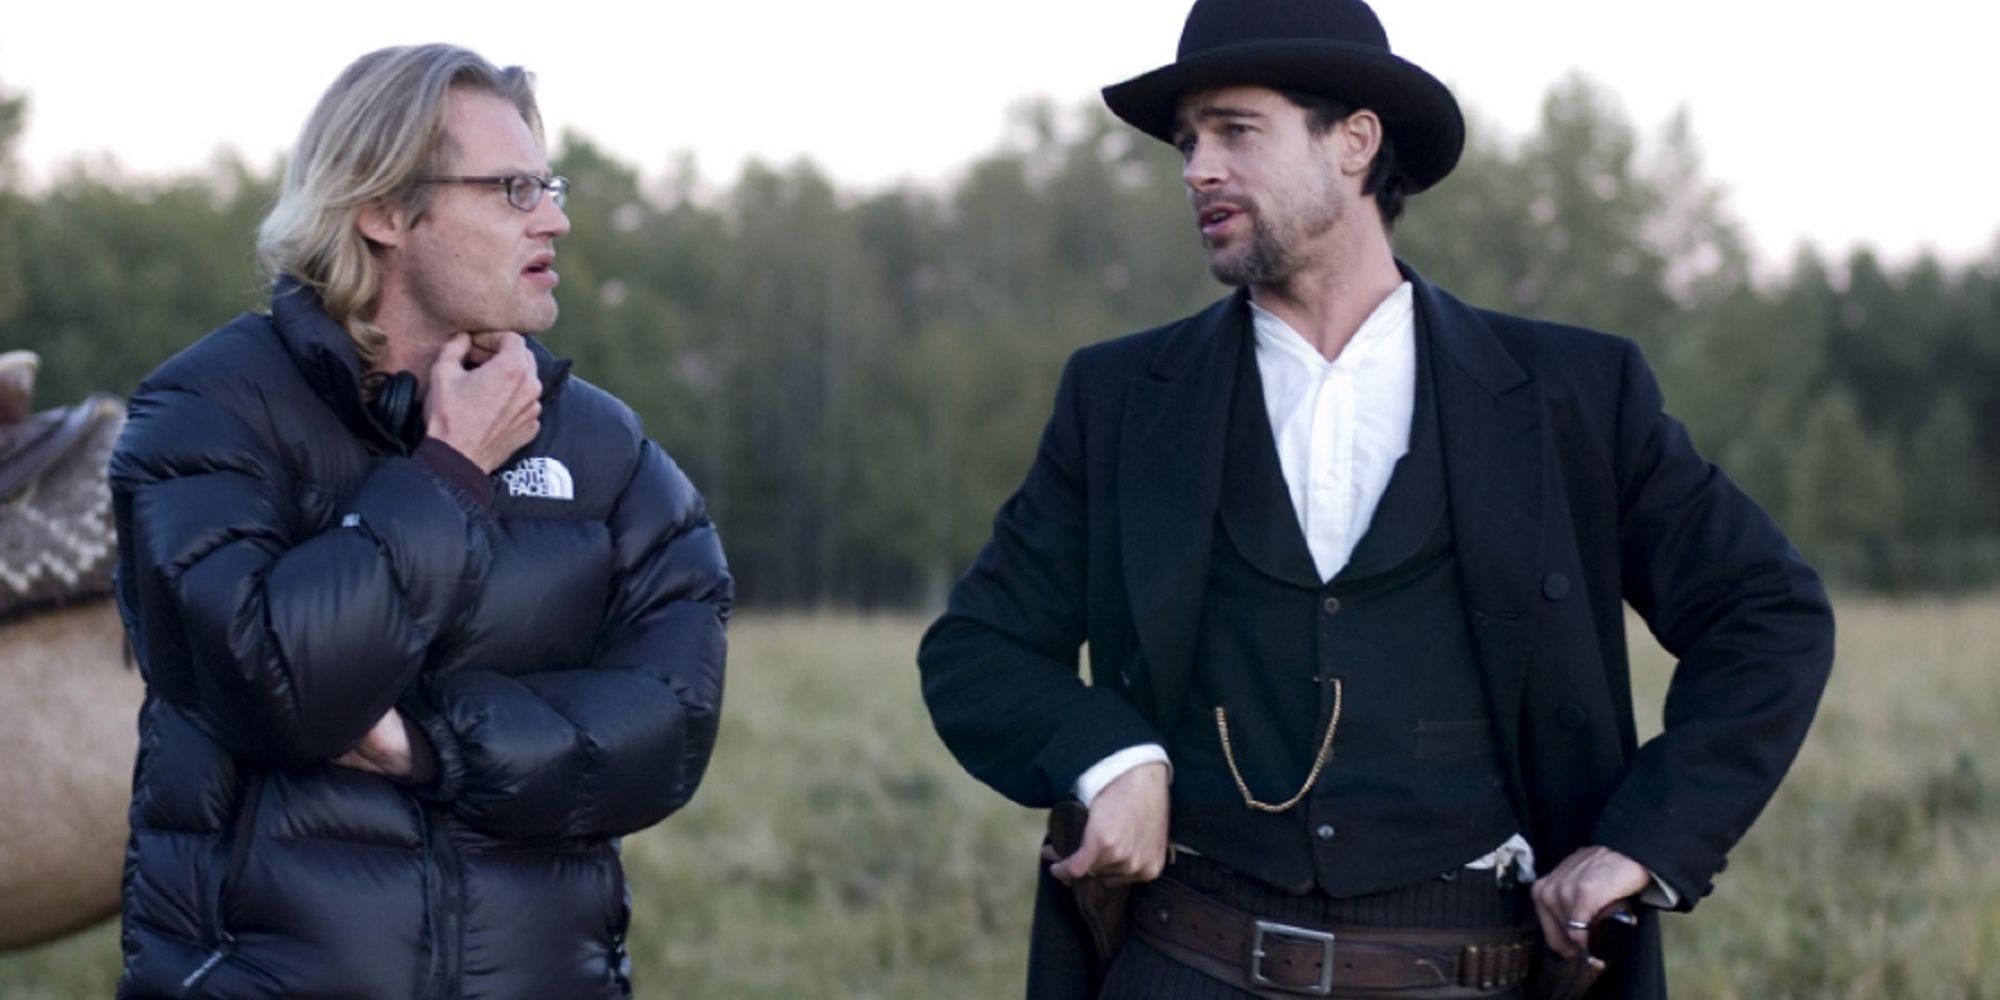 Andrew Dominik and Brad Pitt on set of The Assassination of Jesse James.